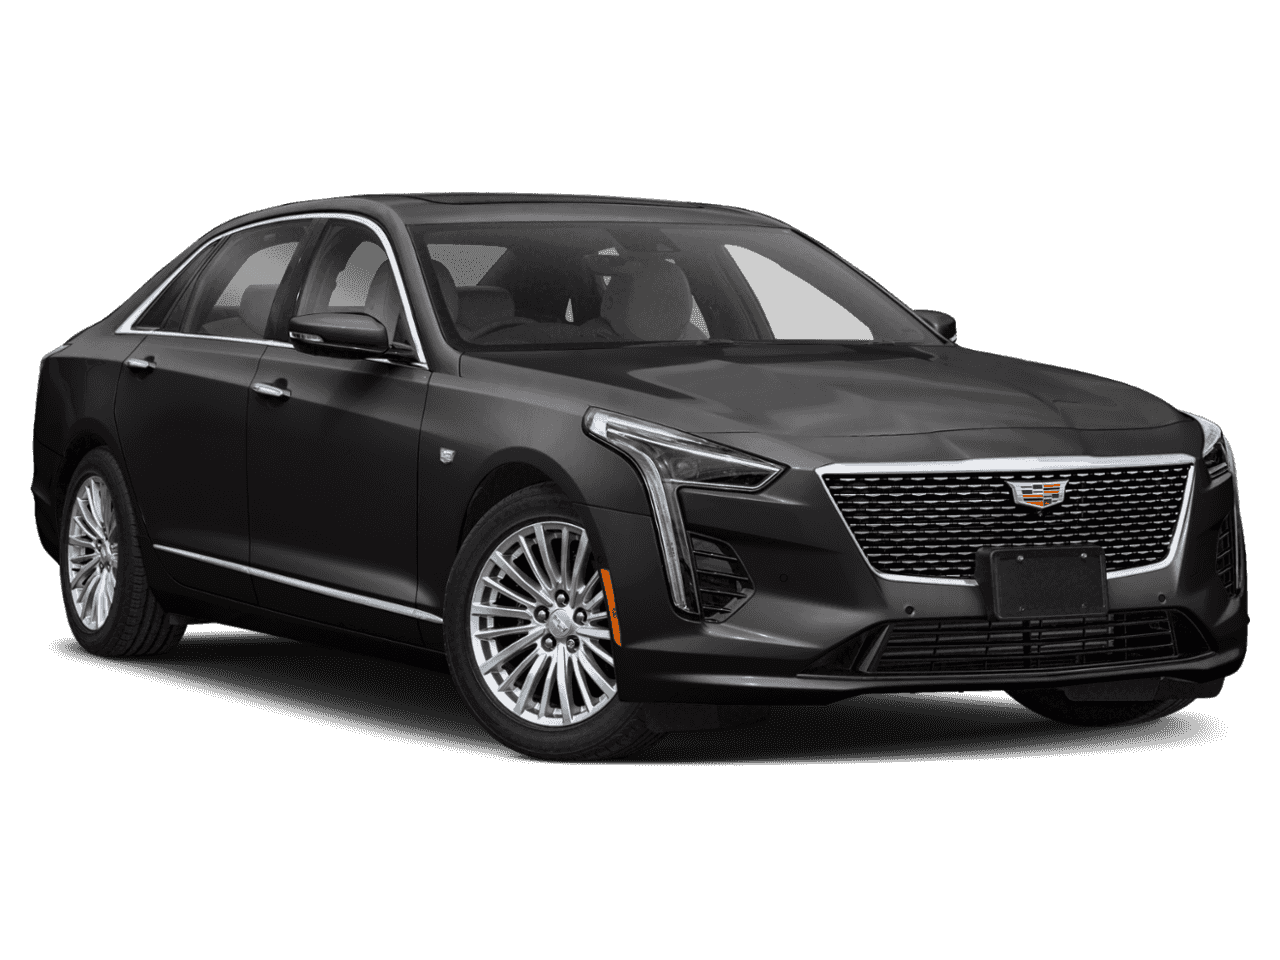 2022 Cadillac Ct6 Brochure Build And Price Awd Cadillac Specs News